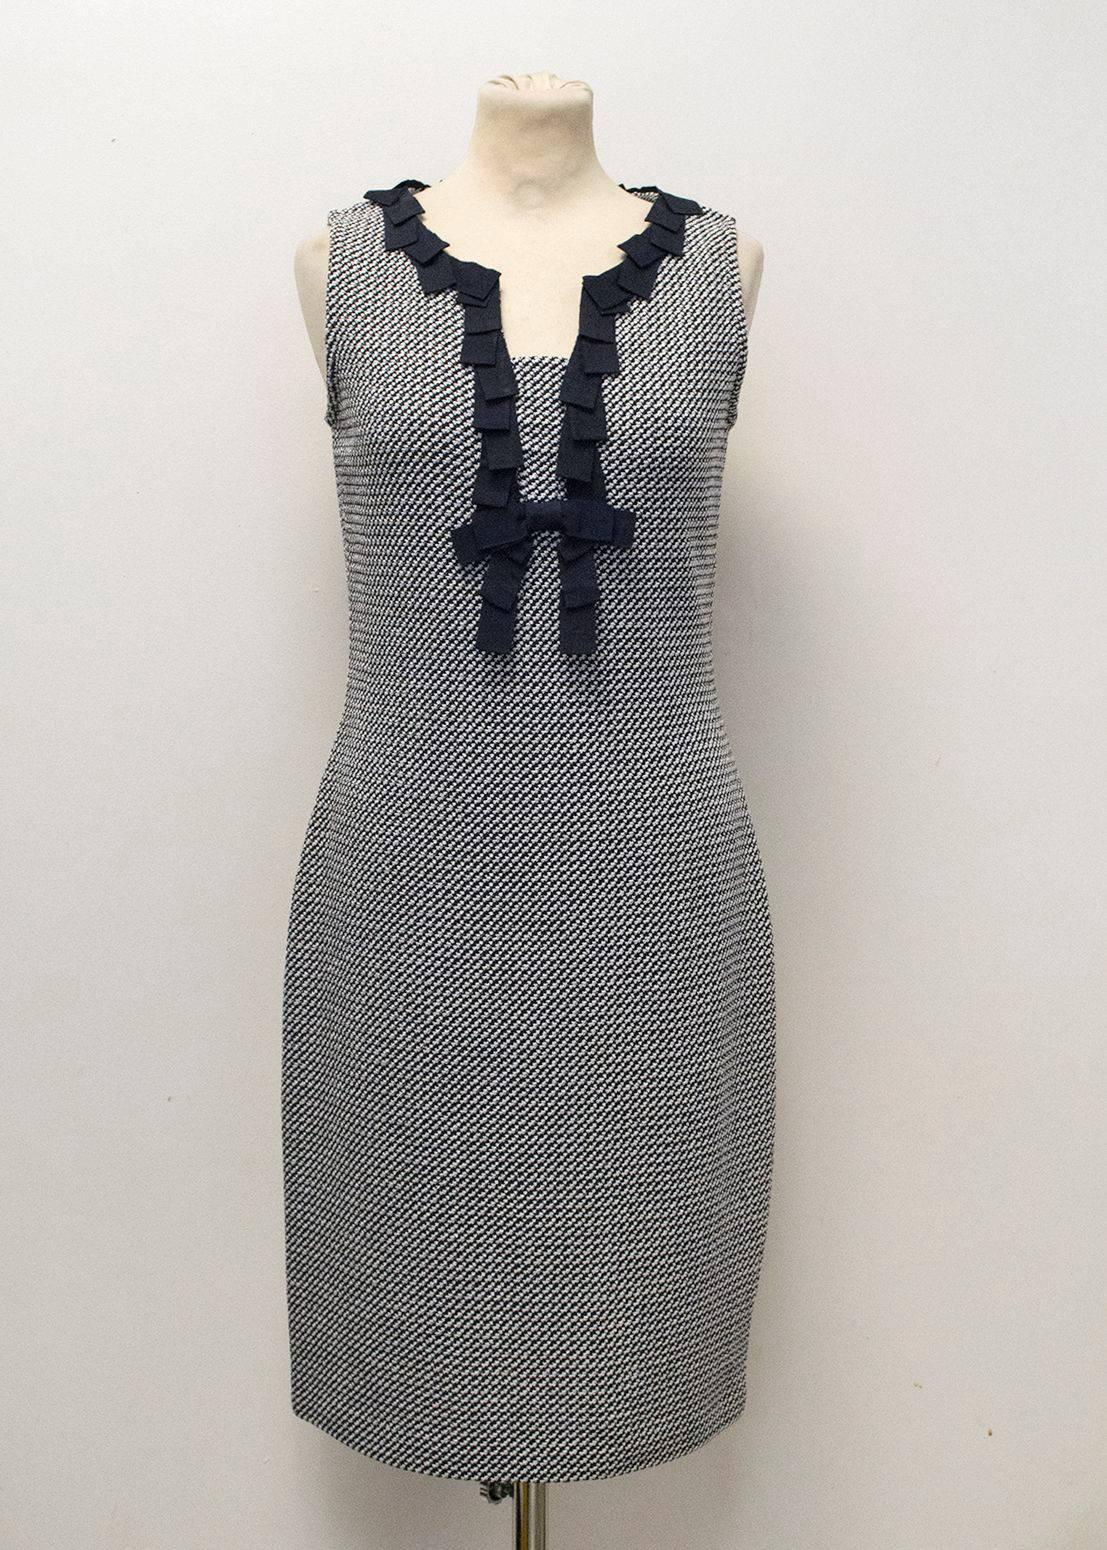 Men's St. John Houndstooth Navy & White Dress and Jacket For Sale